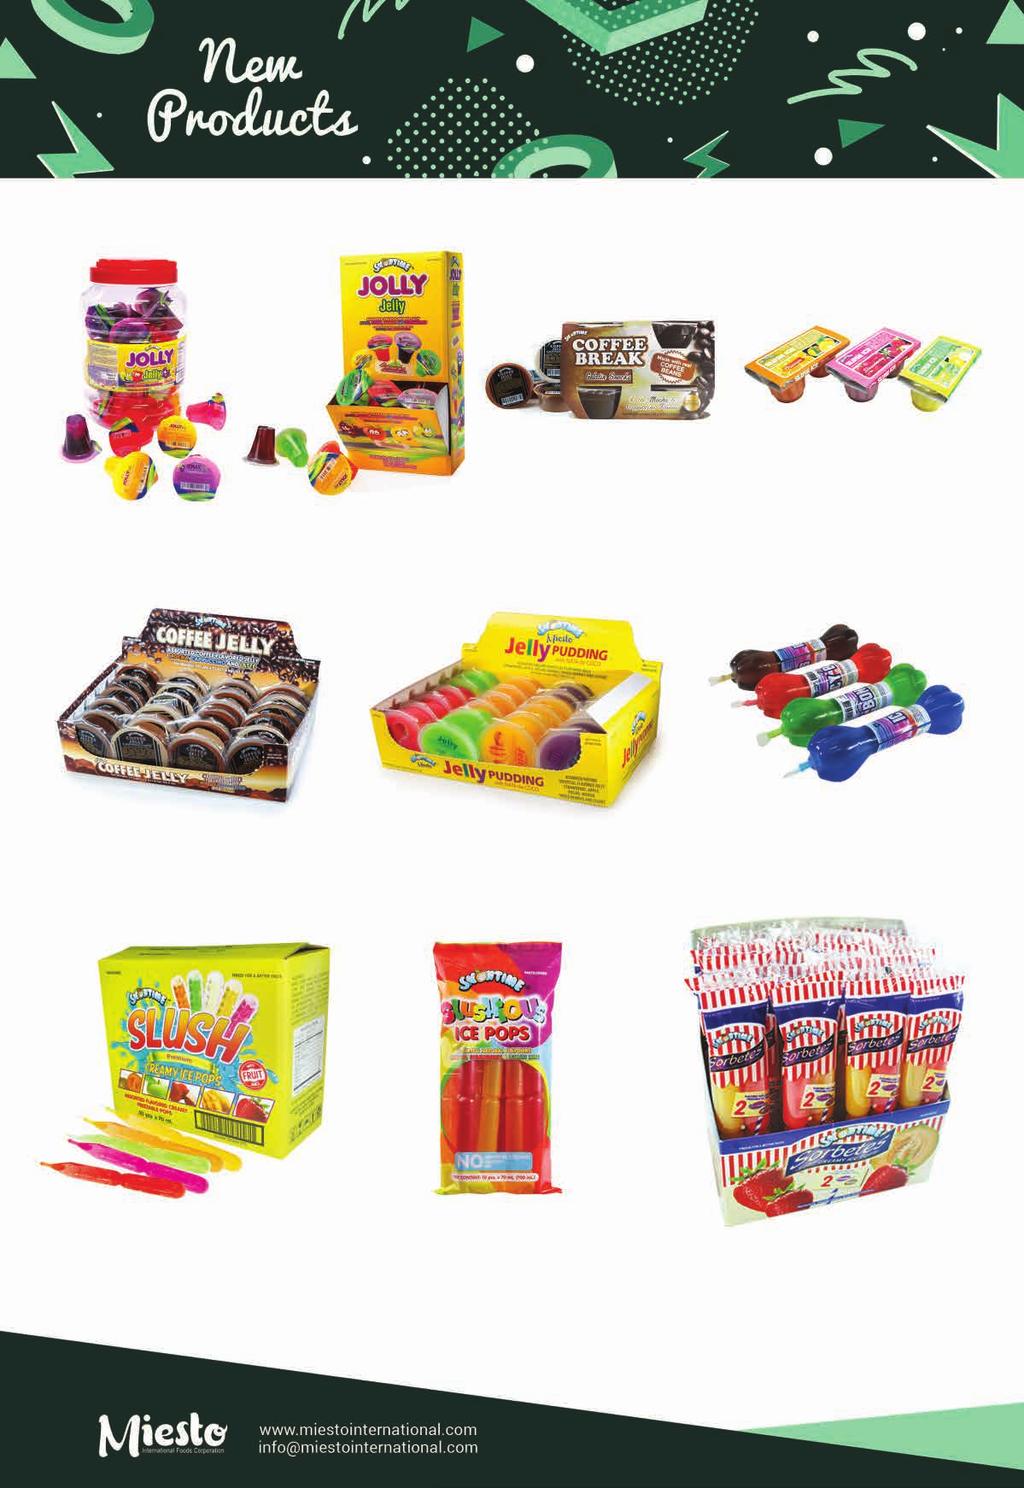 New Products Jolly Jelly in Jar Category: Jelly Jolly Jelly (Gravity Drop Box) Category: Jelly Coffee Jelly in tray Category: Jelly Slush Ice in tray Artificial & Natural Category: Ice Pop Coffee